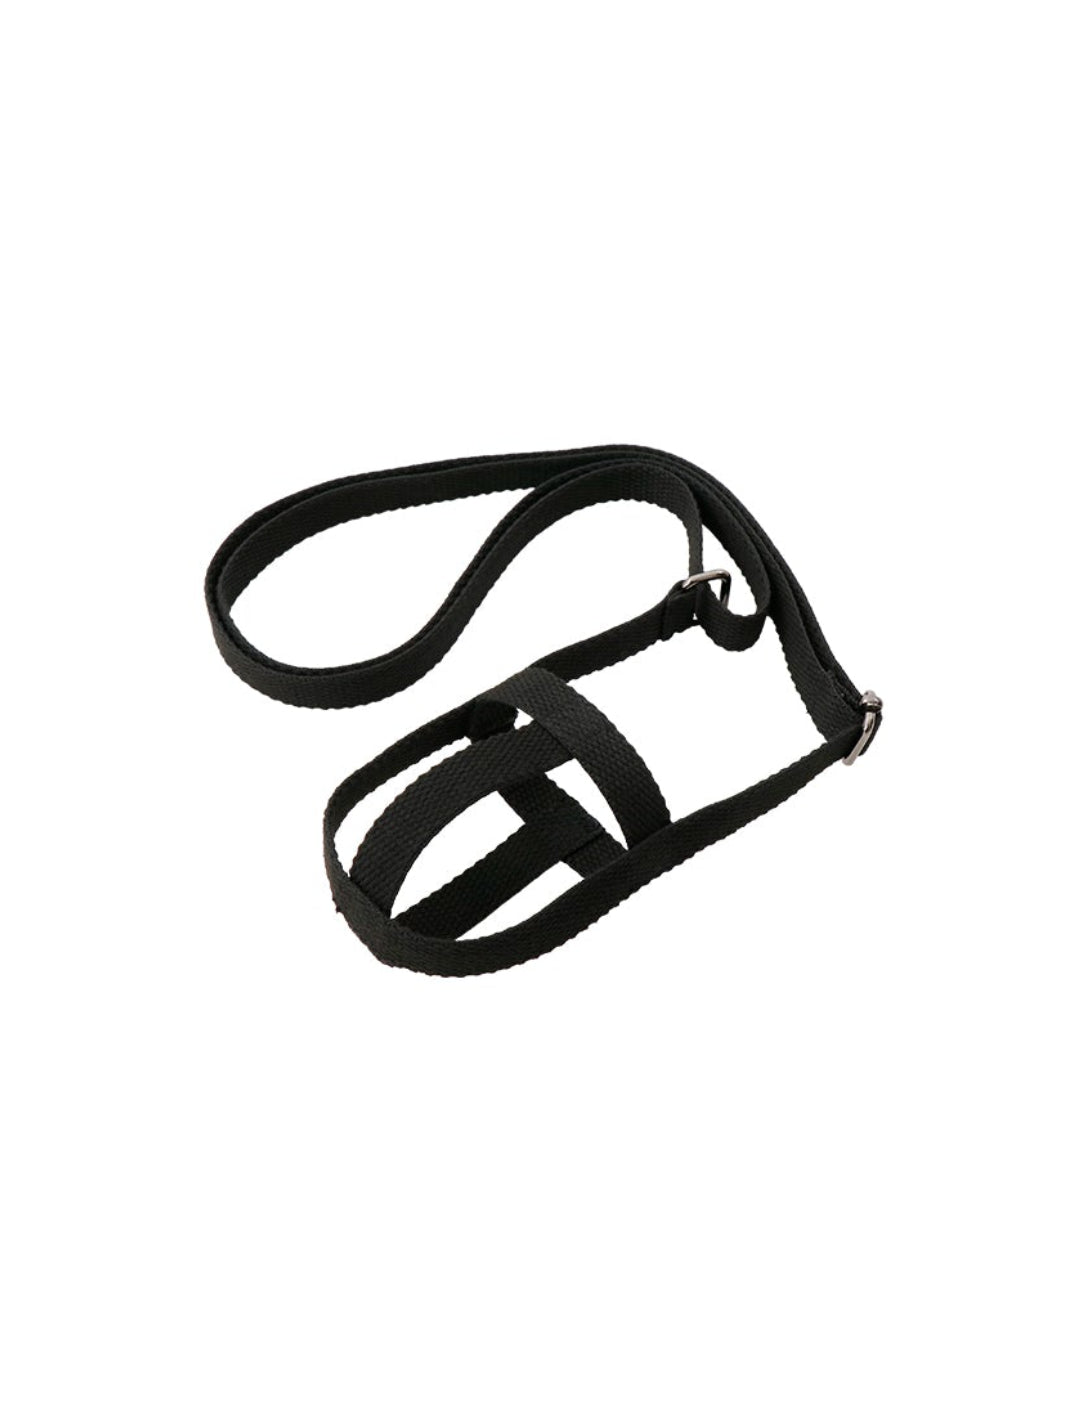 KINTO Tumbler Strap (Small) (70mm/2.8in)